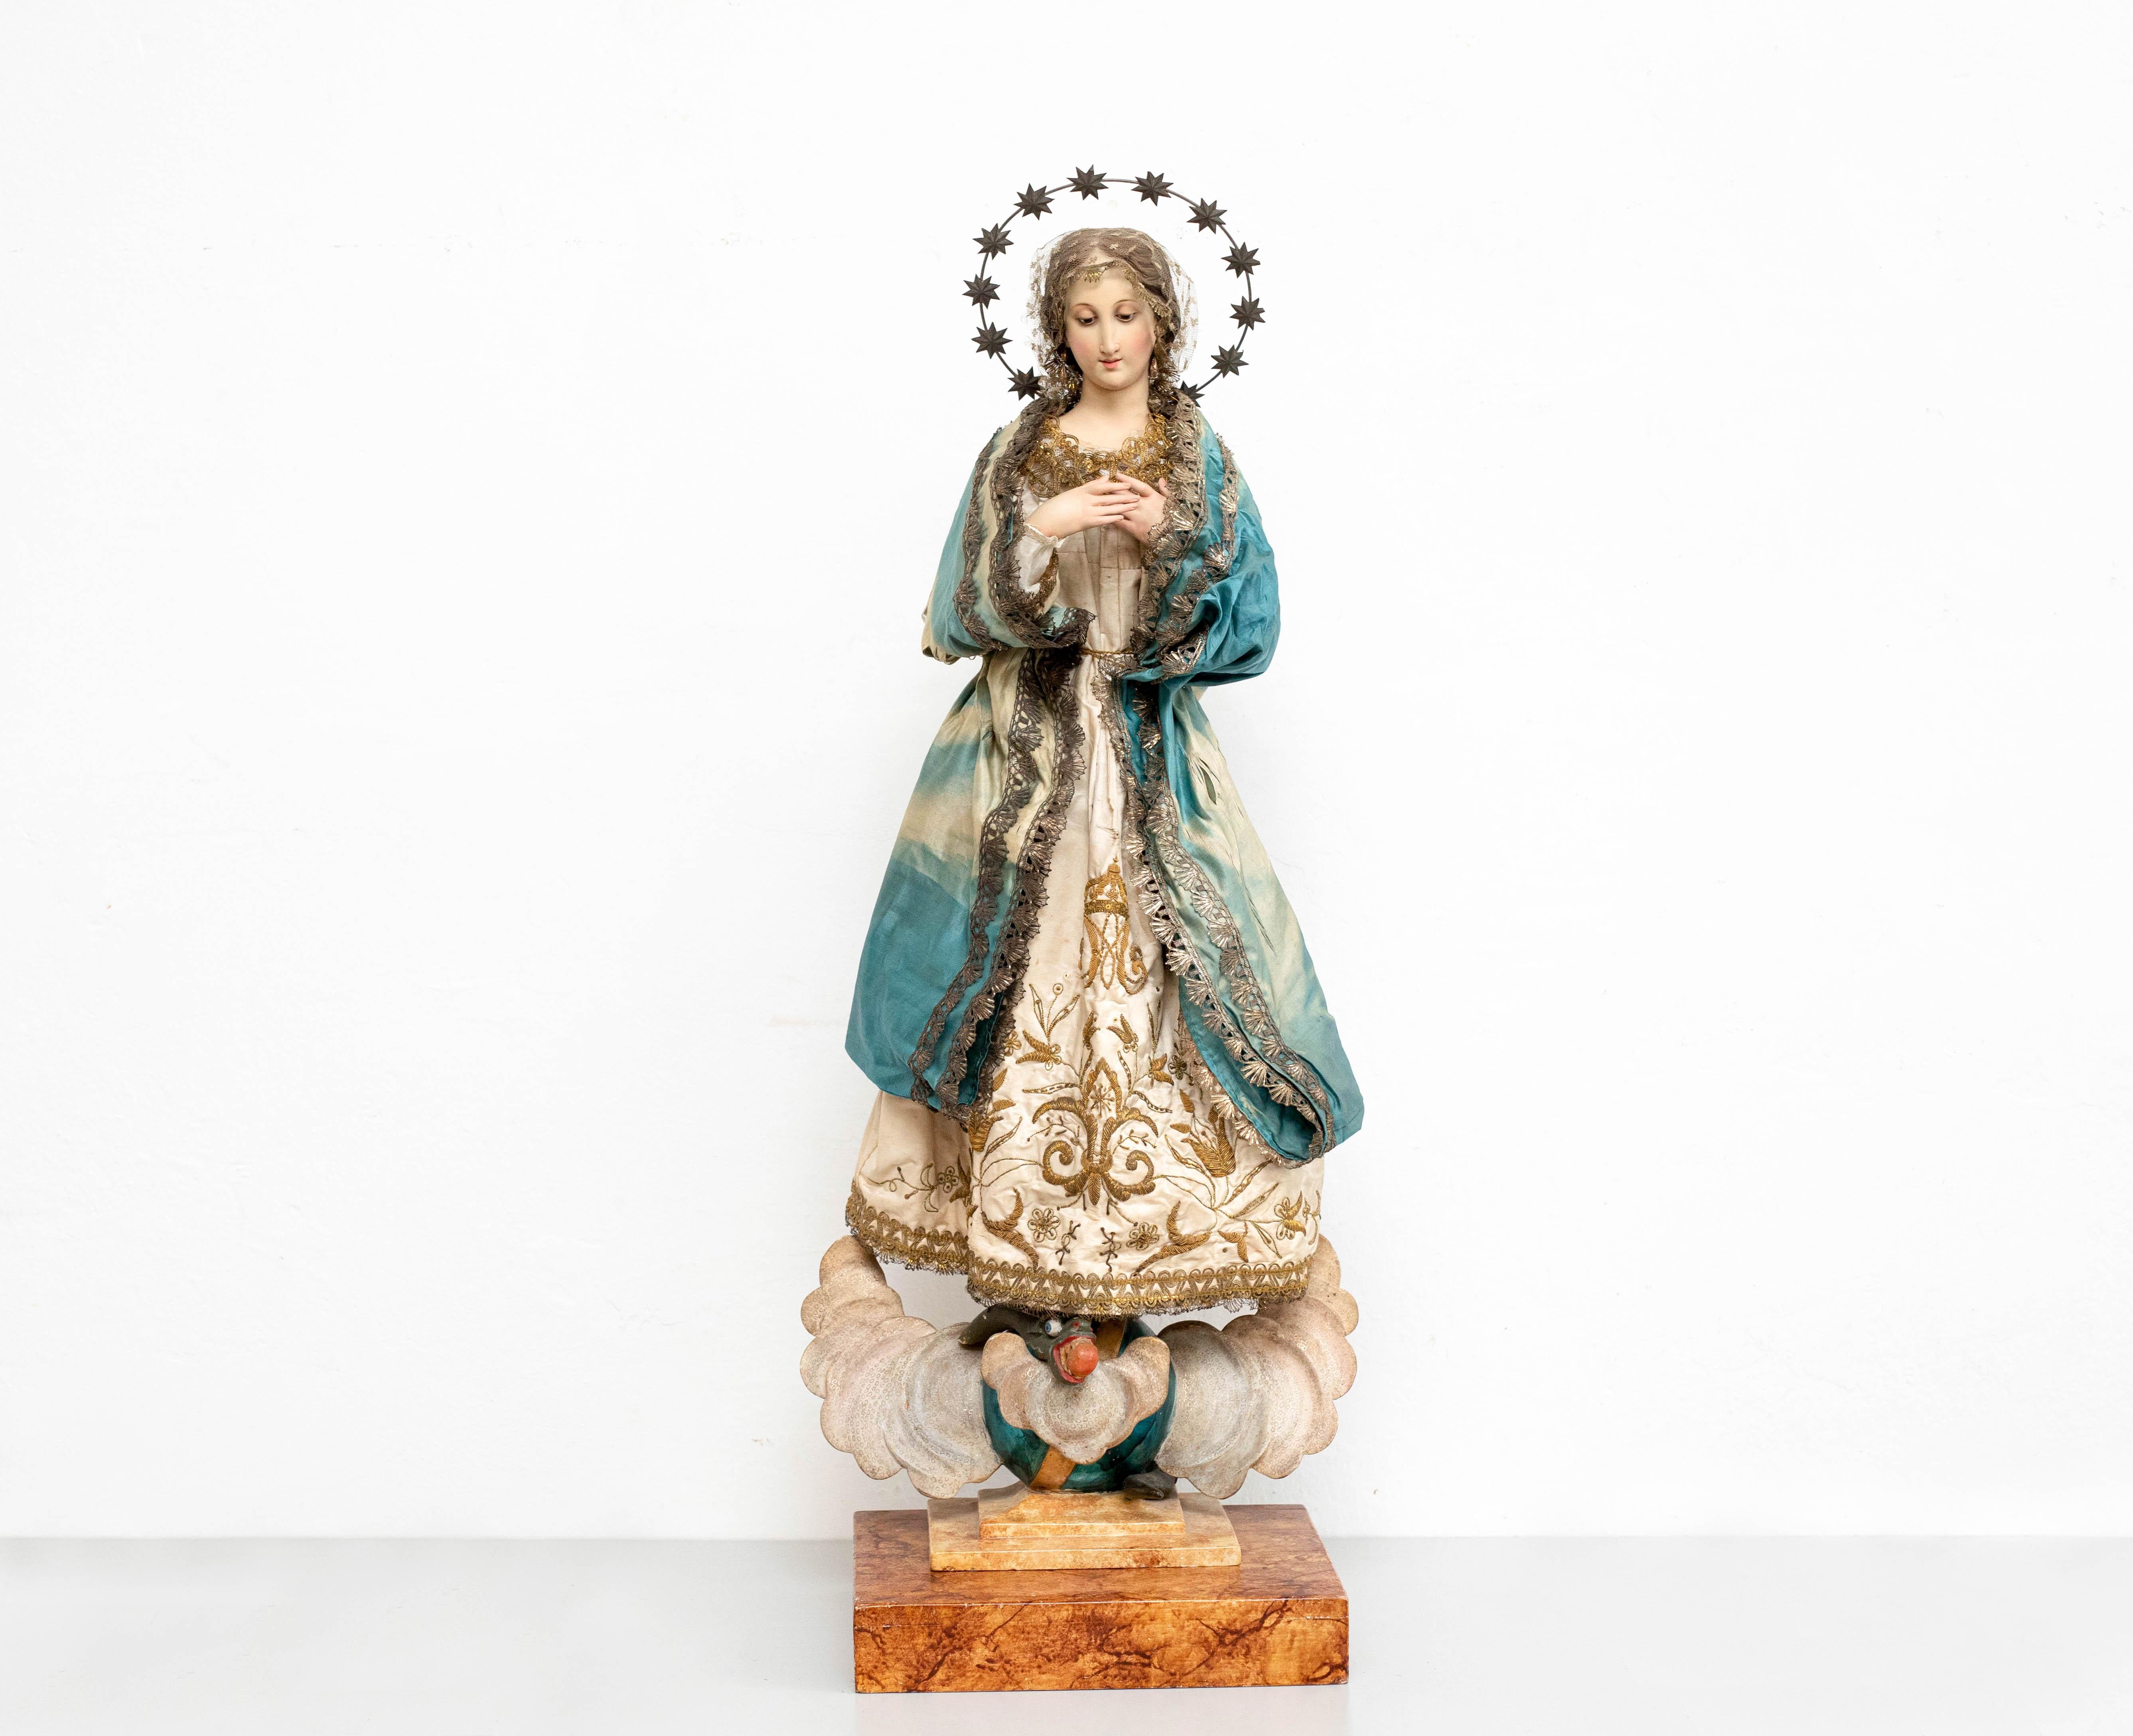 Traditional religious wood Sculpture of a virgin.

Made in Catalonia Spain, circa 1940.

It's a beautiful piece of religious wood with glass eyes.

In original condition, with minor wear consistent with age and use, preserving a beautiful